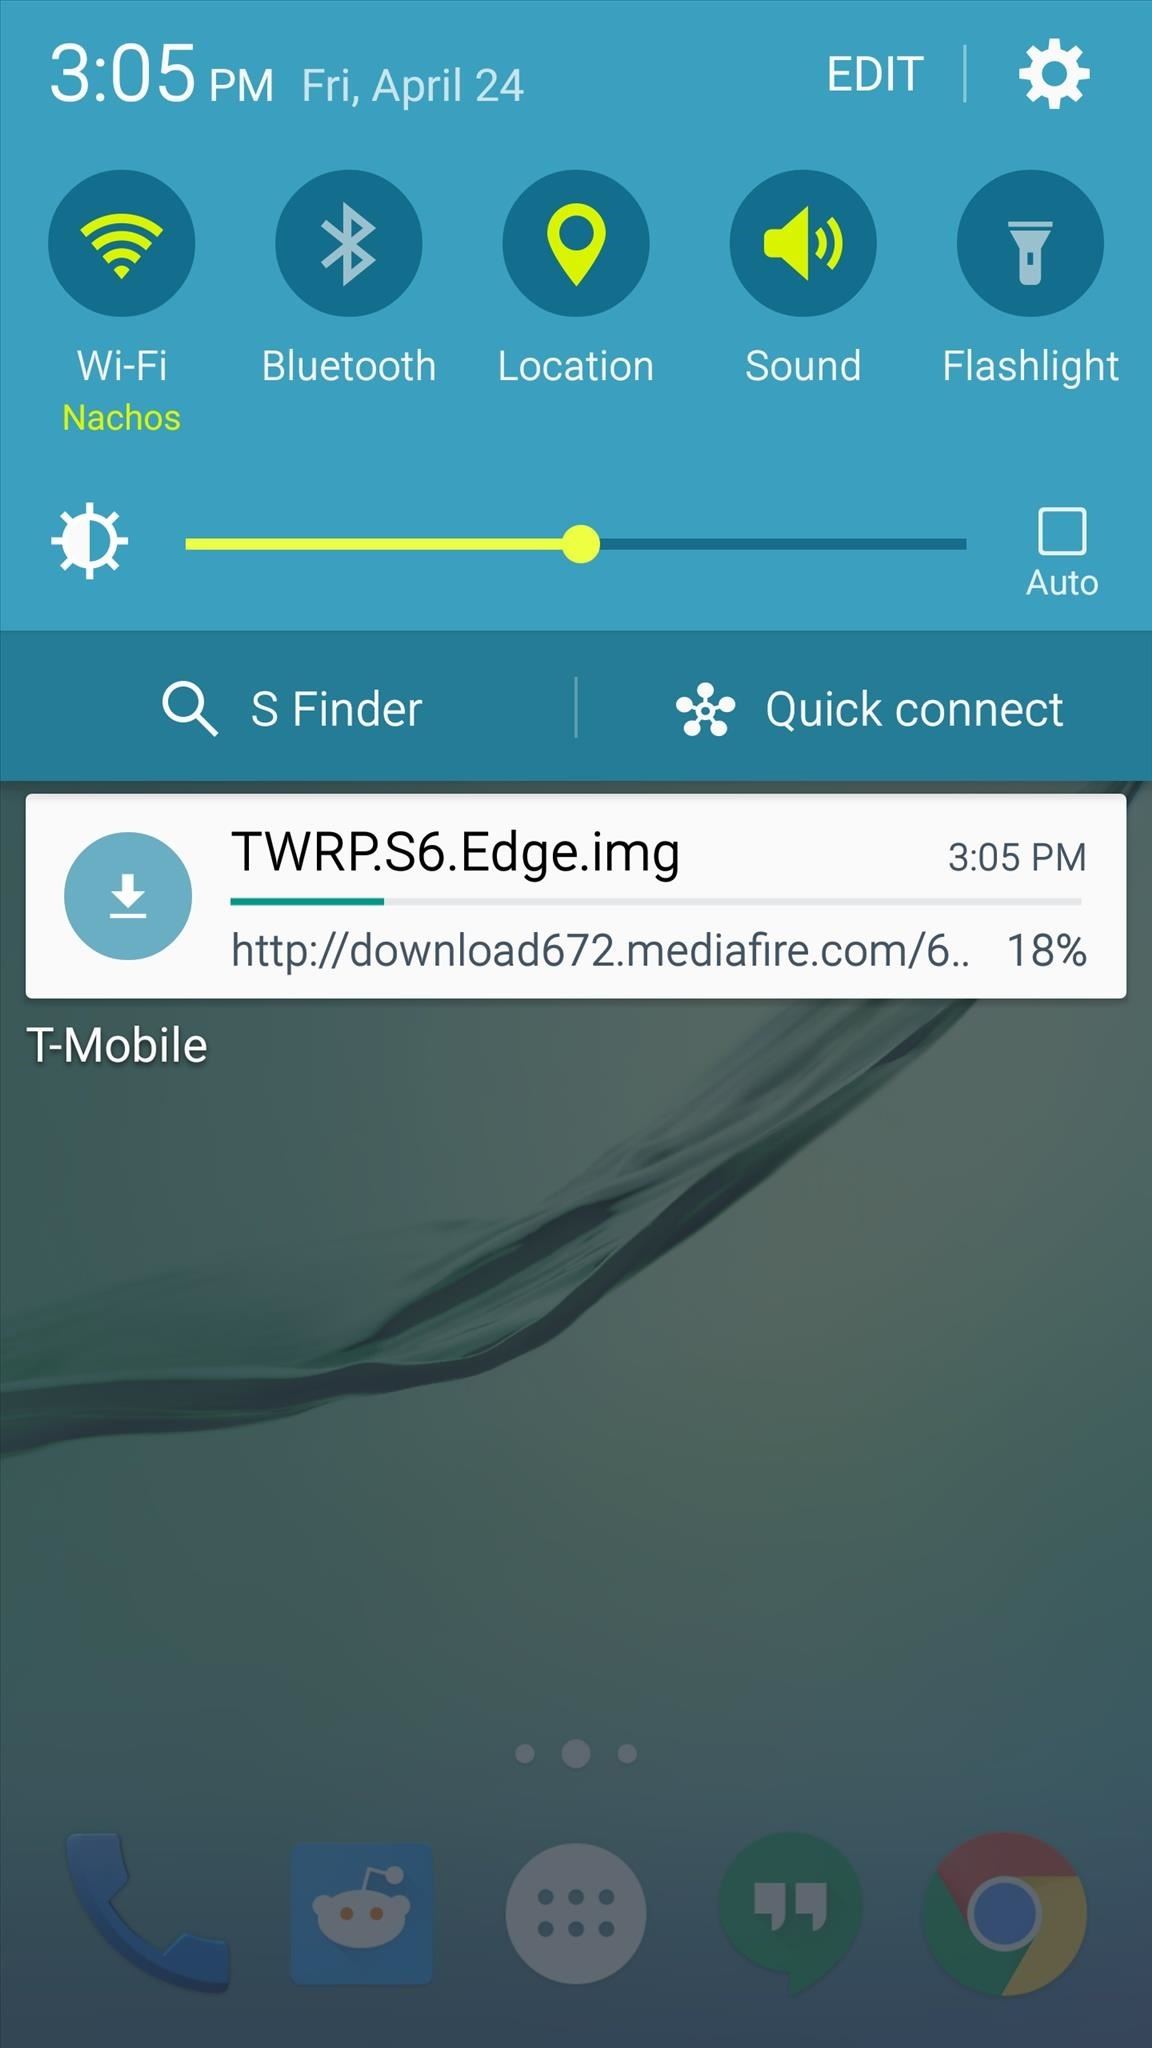 How to Install a Custom Recovery on Your Galaxy S6 or S6 Edge